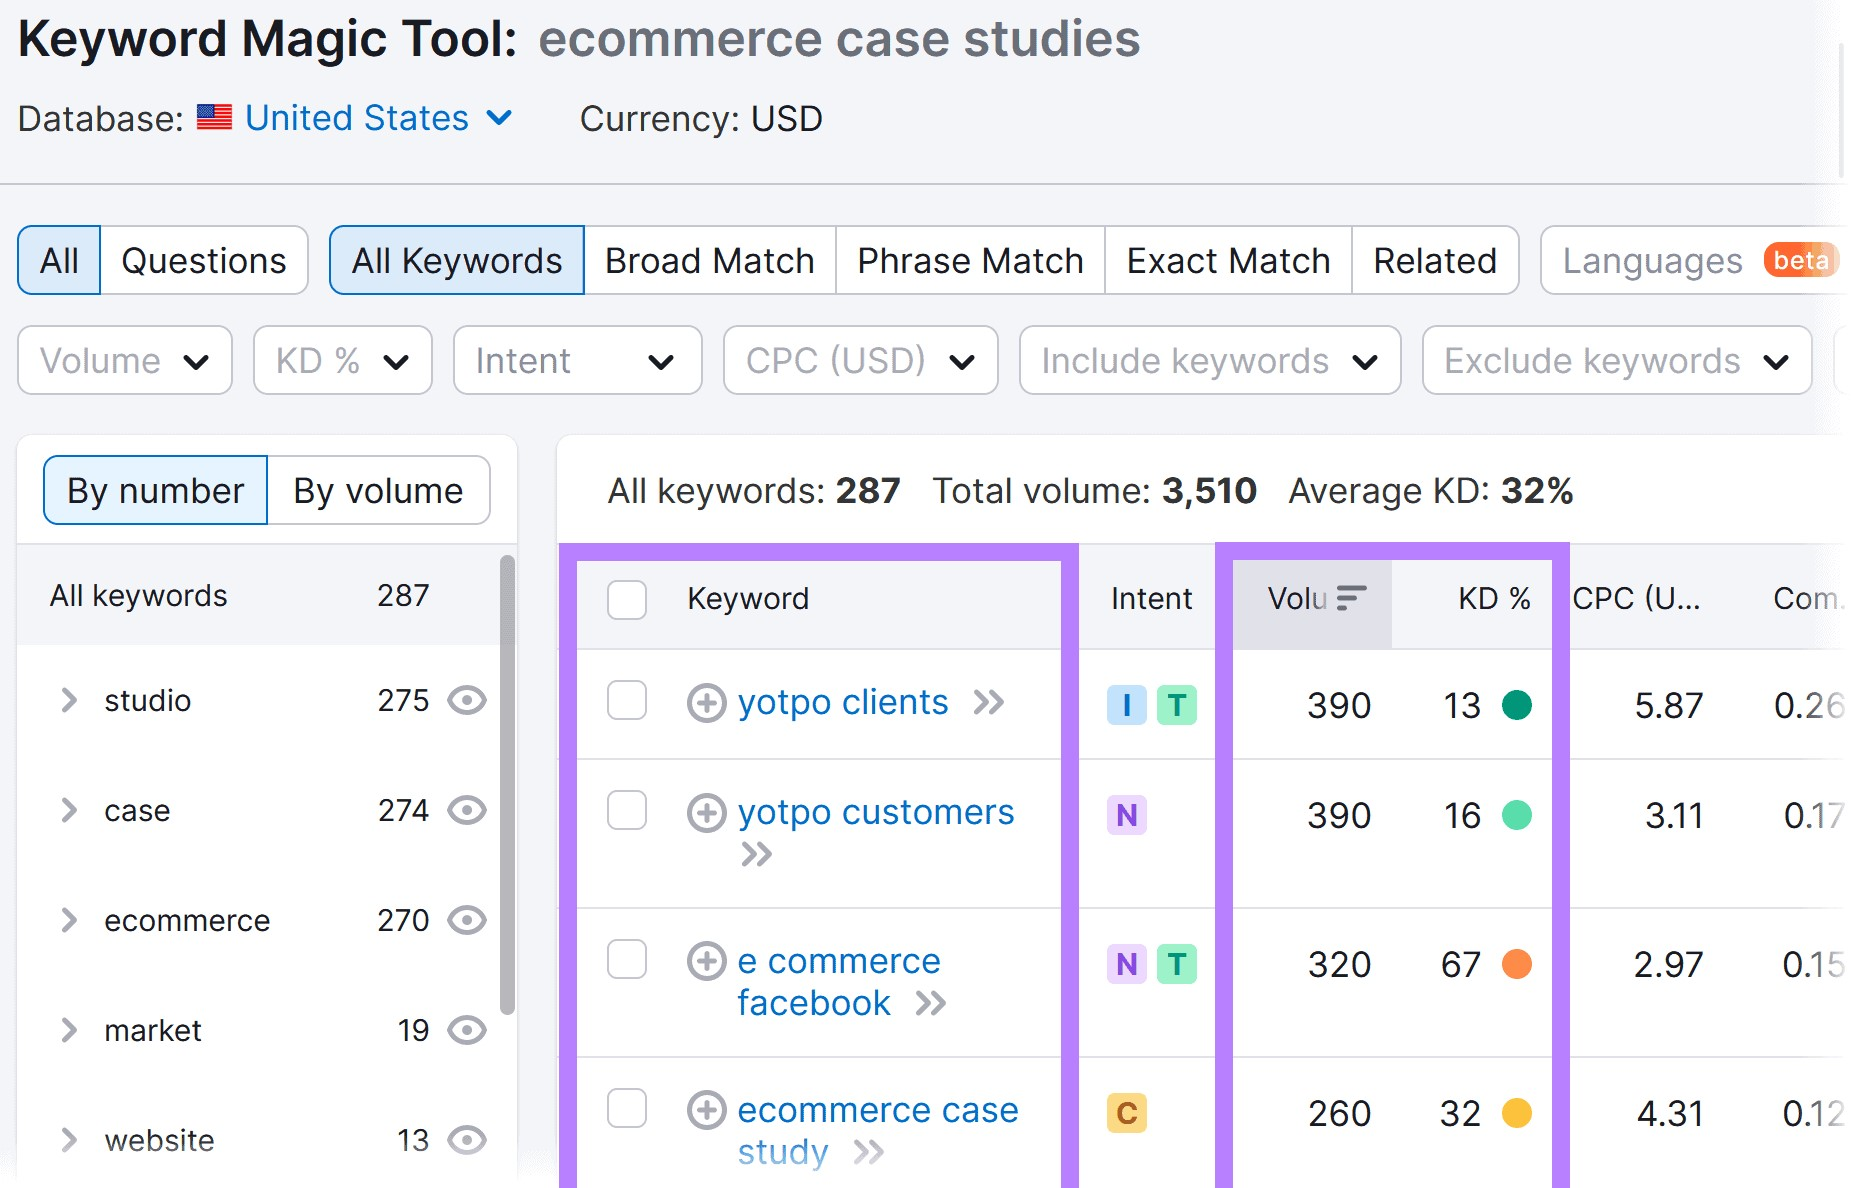 Keyword Magic Tool results for "ecommerce case studies" with "Keyword," "Vol," and "KD%" columns highlighted